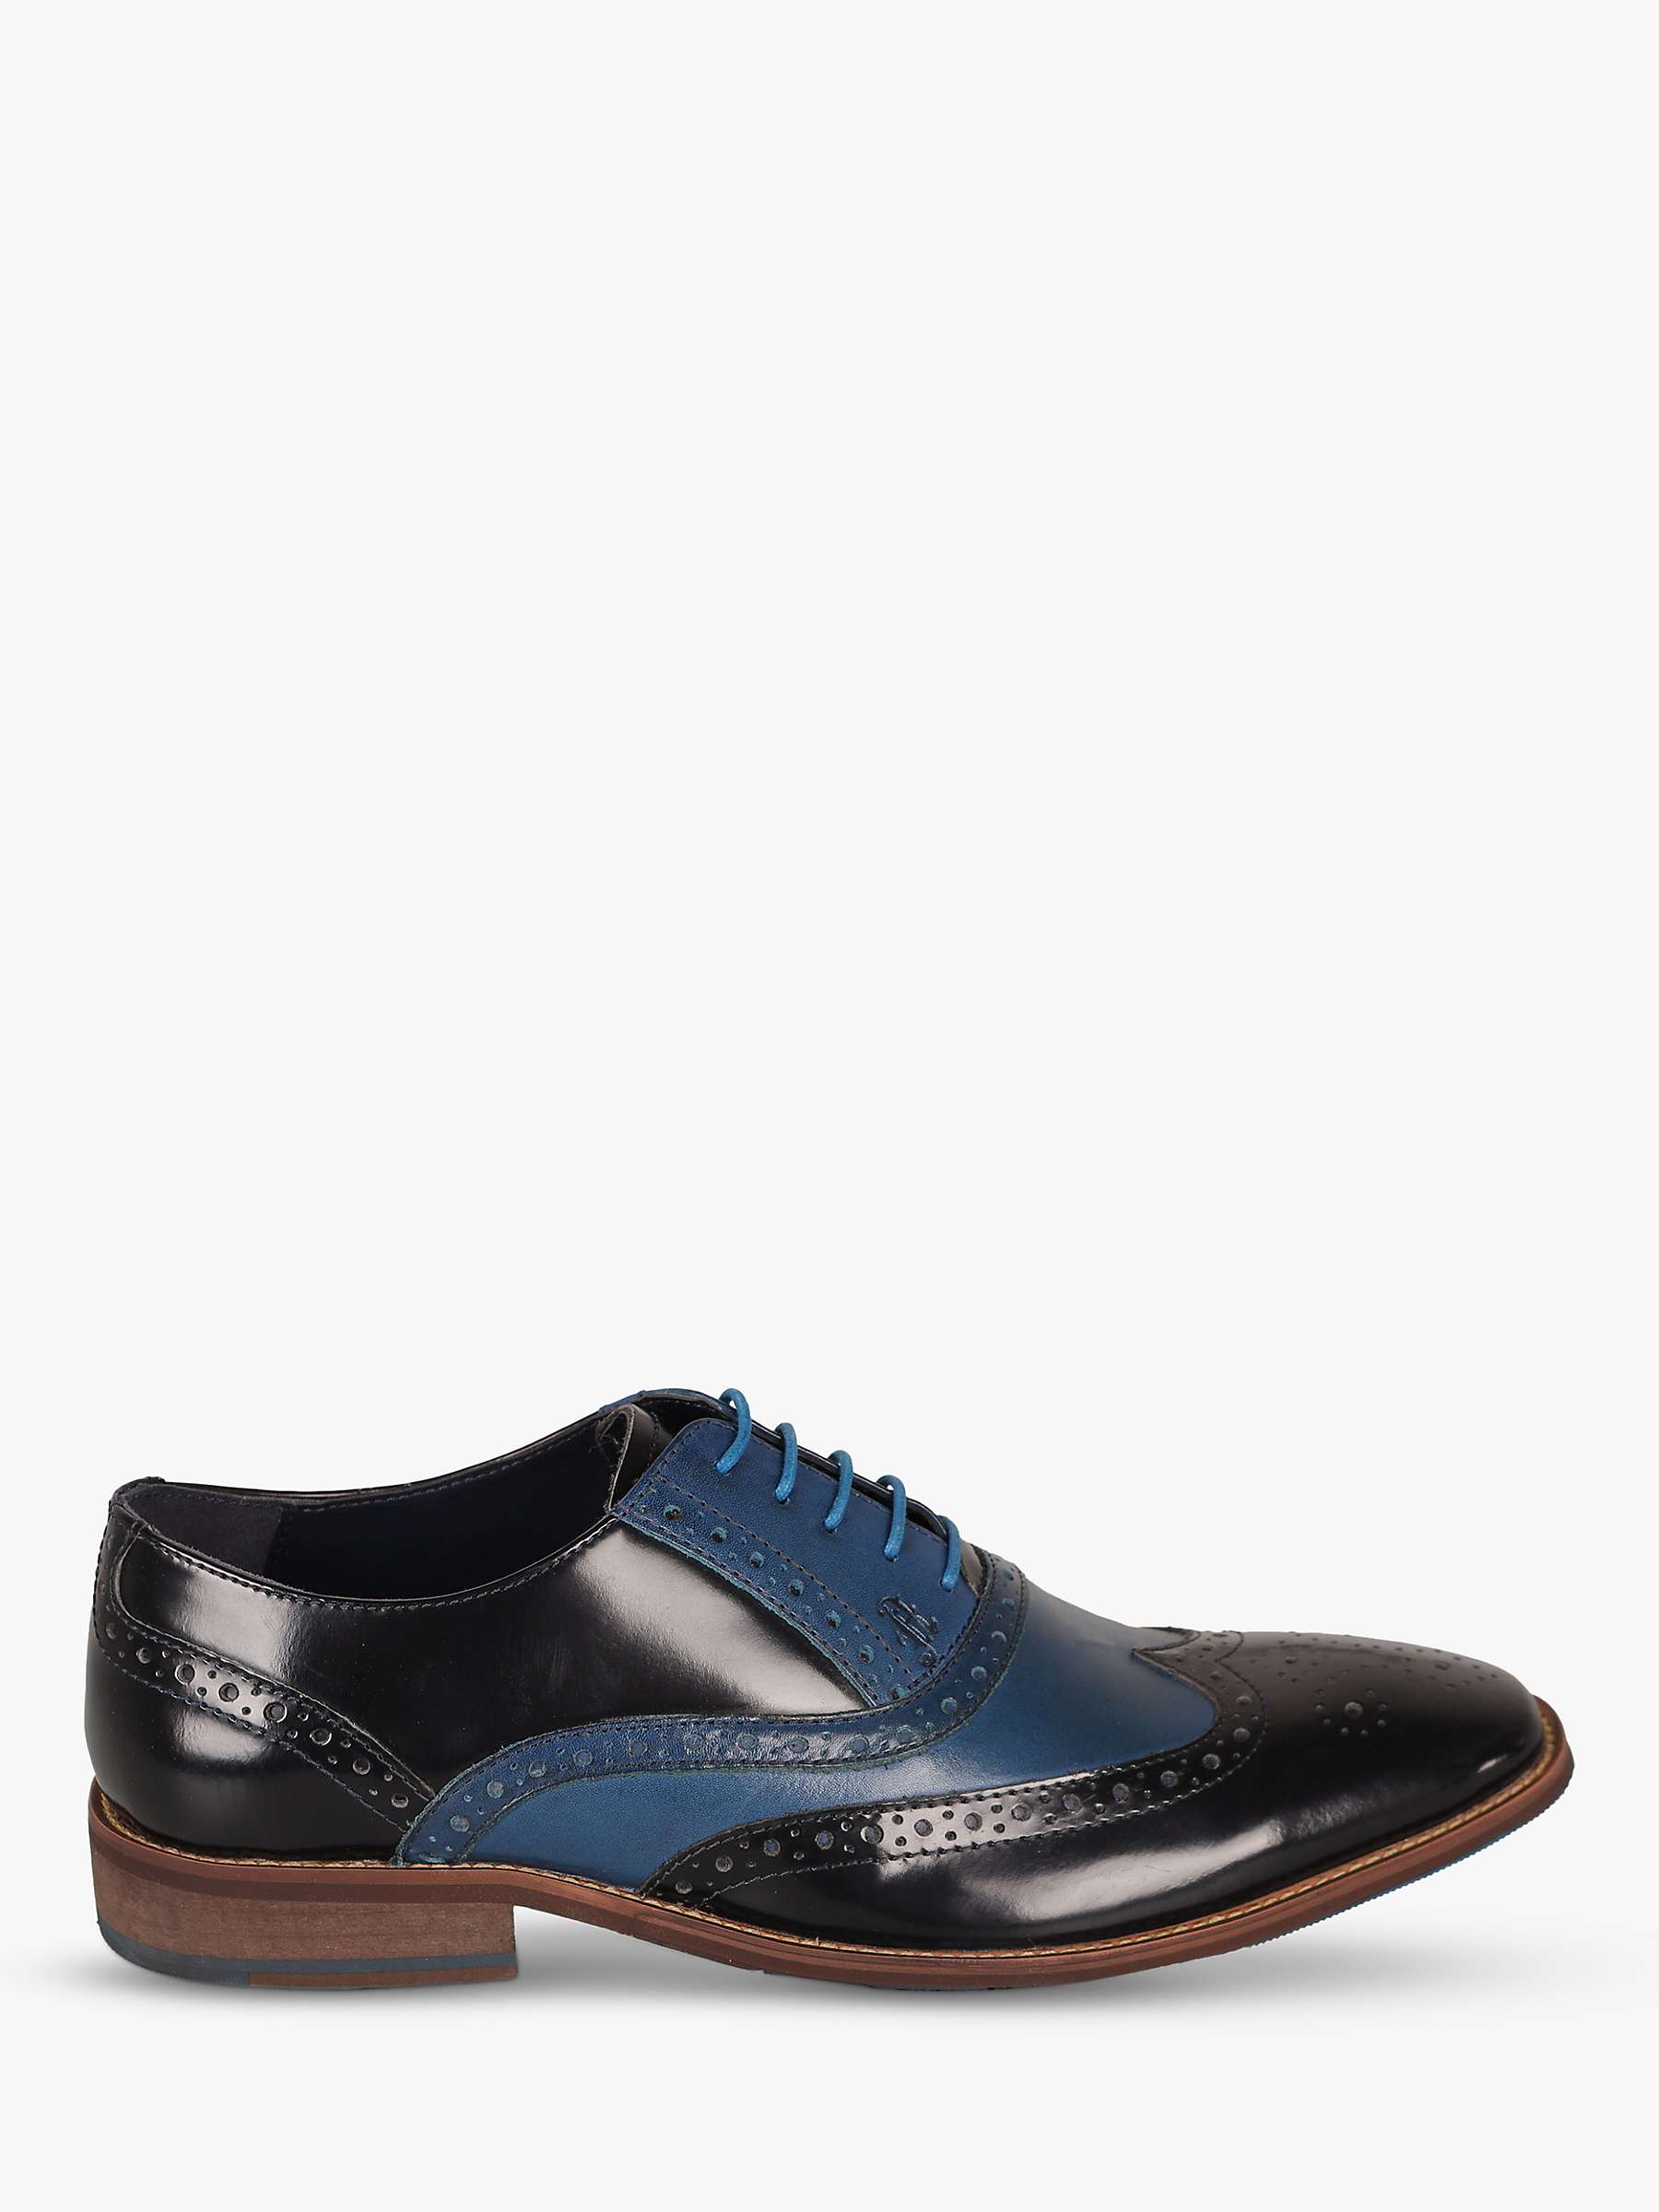 Buy Silver Street London Amen Collection Derry Leather Brogues, Blue/Black Online at johnlewis.com